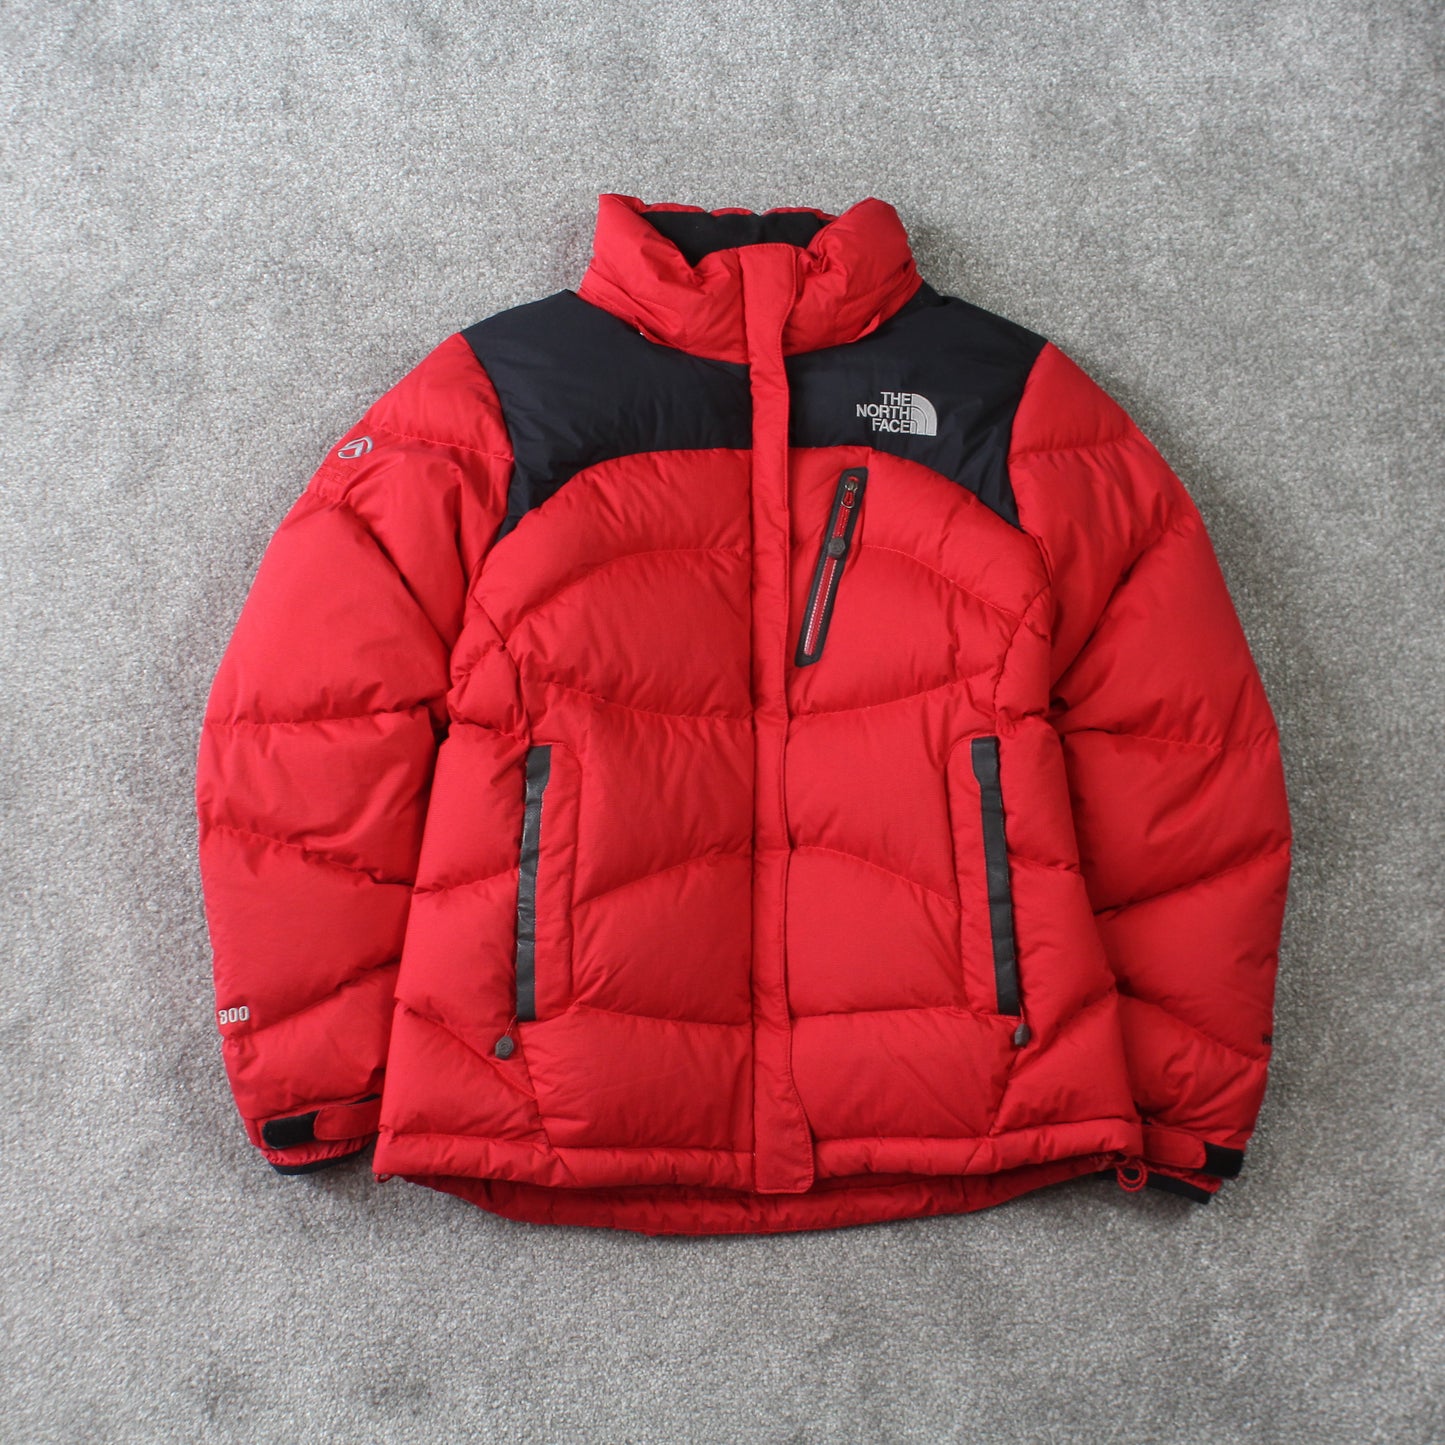 The North Face 800 Baltoro Puffer Jacket Red - (XS)